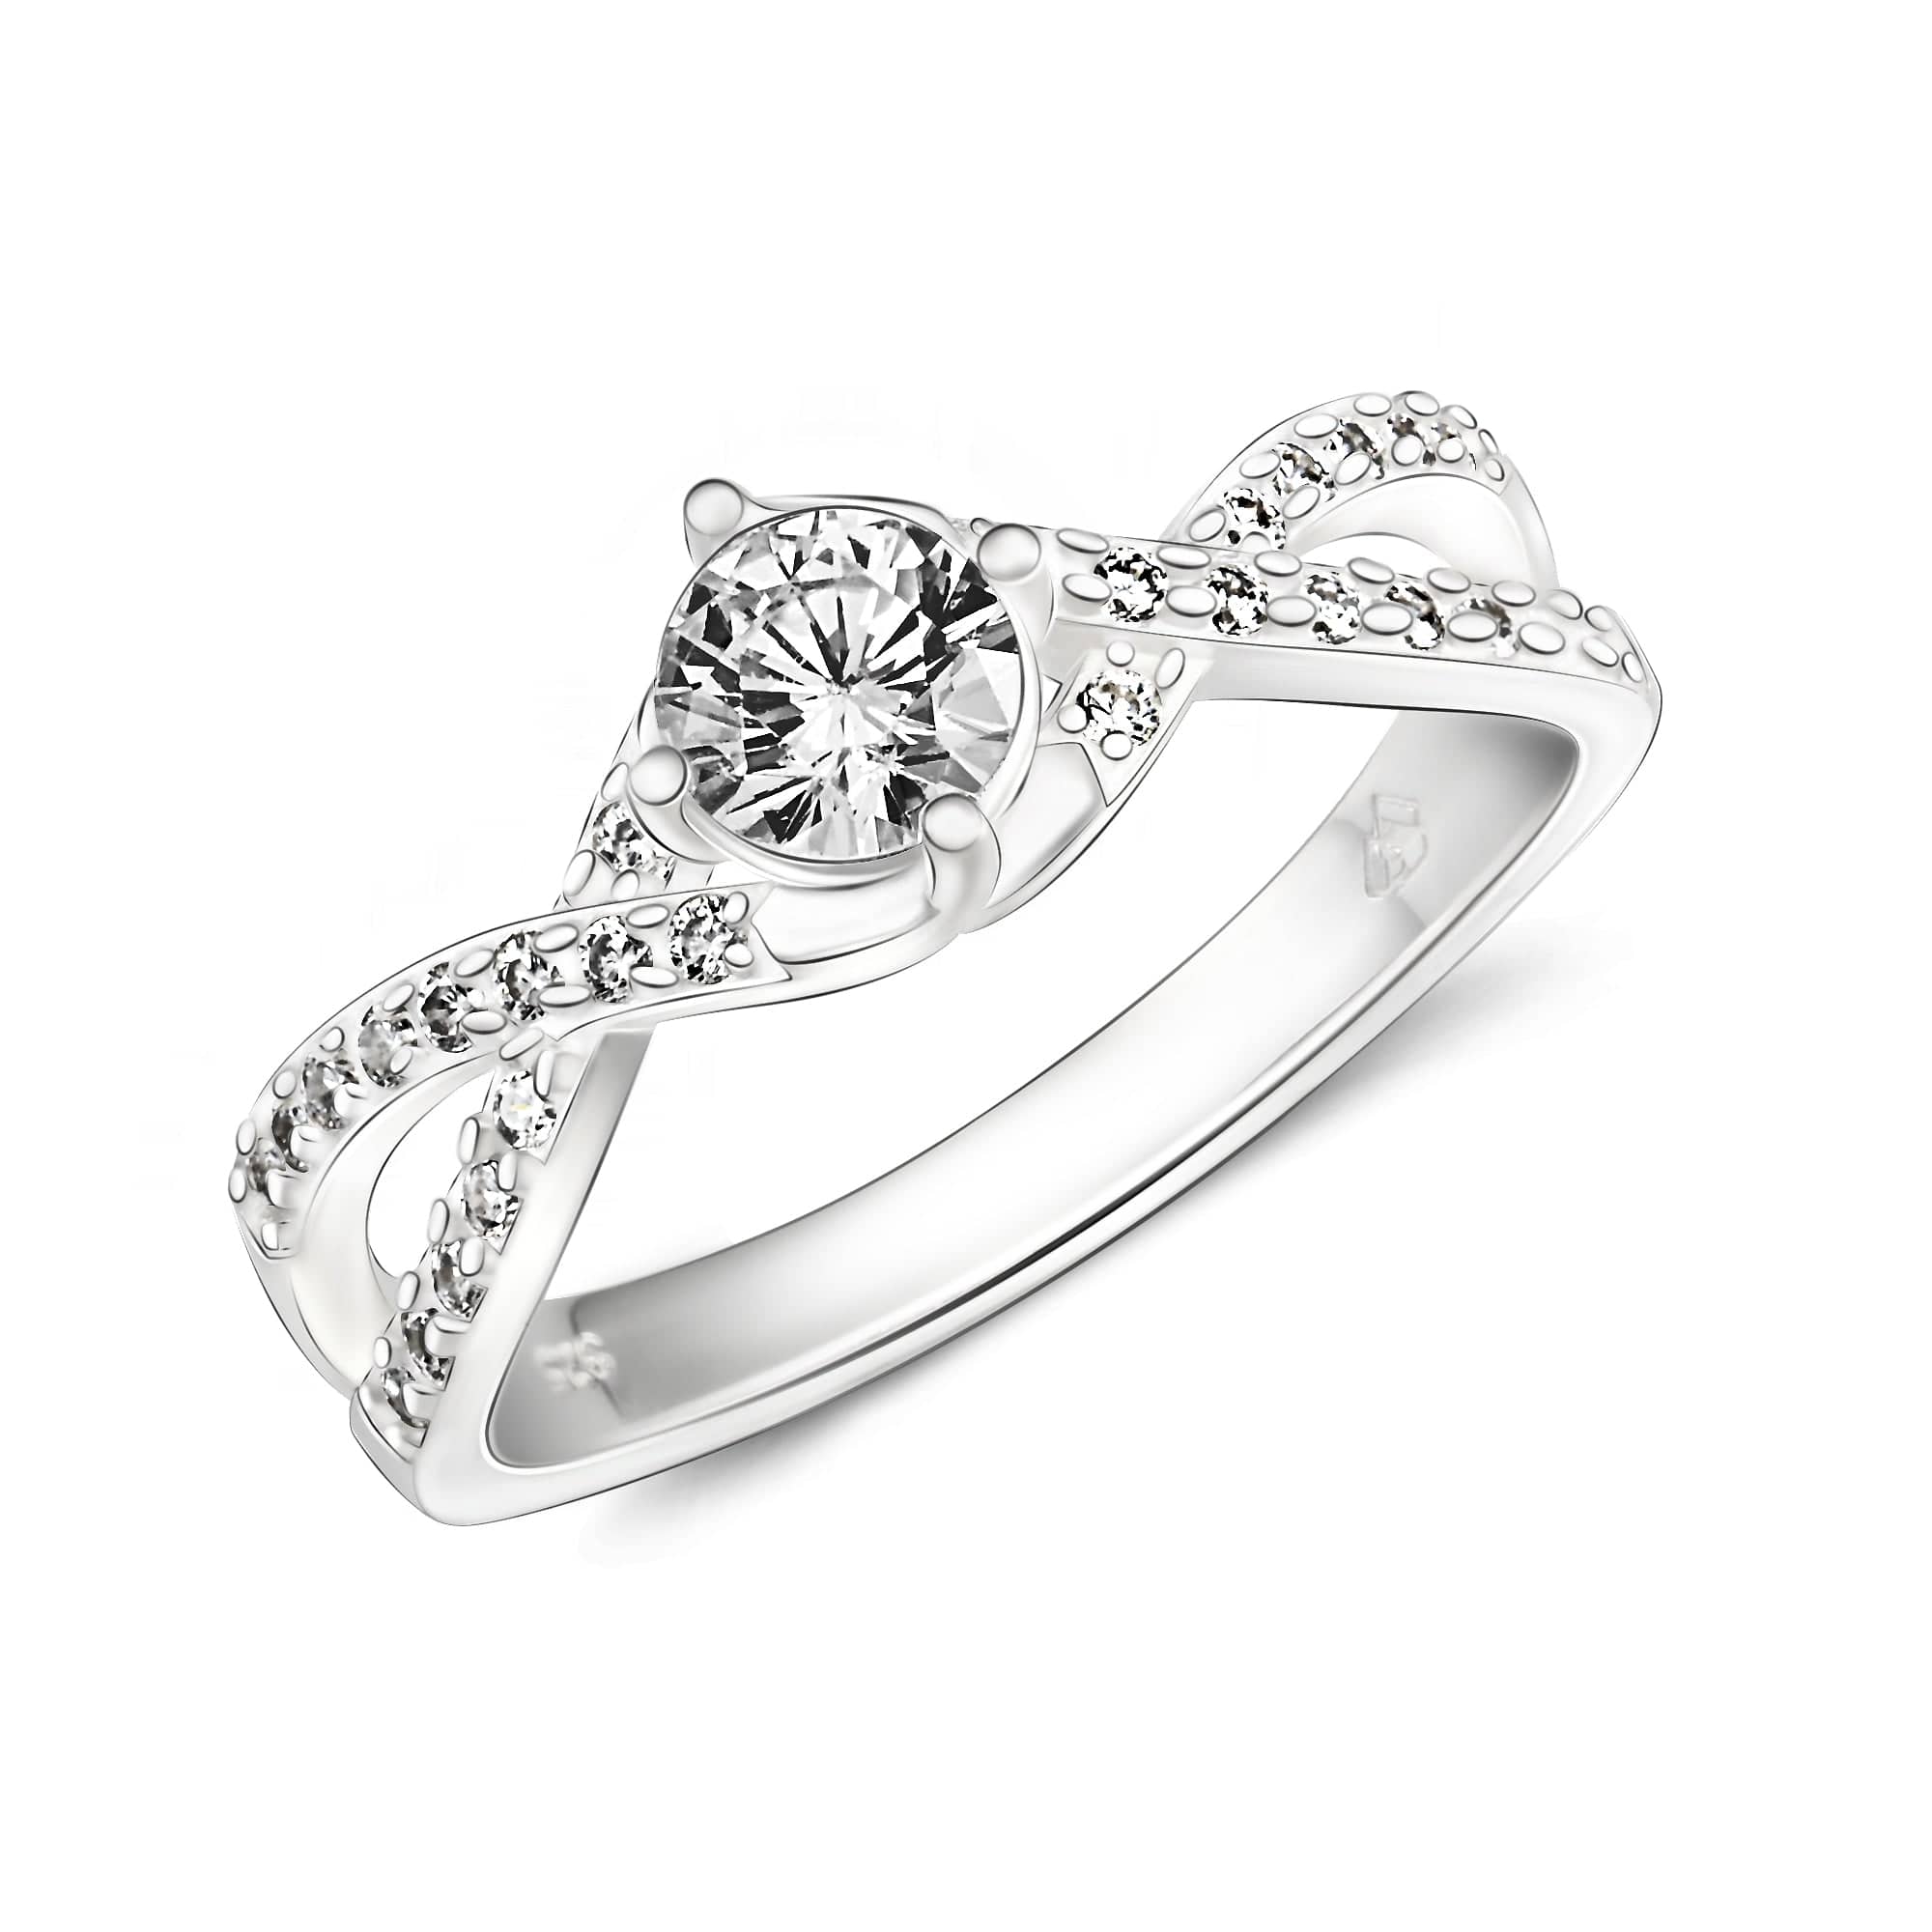 Twist Criss Cross Cubic Zirconia Engagement Ring Sterling Silver Promise Ring